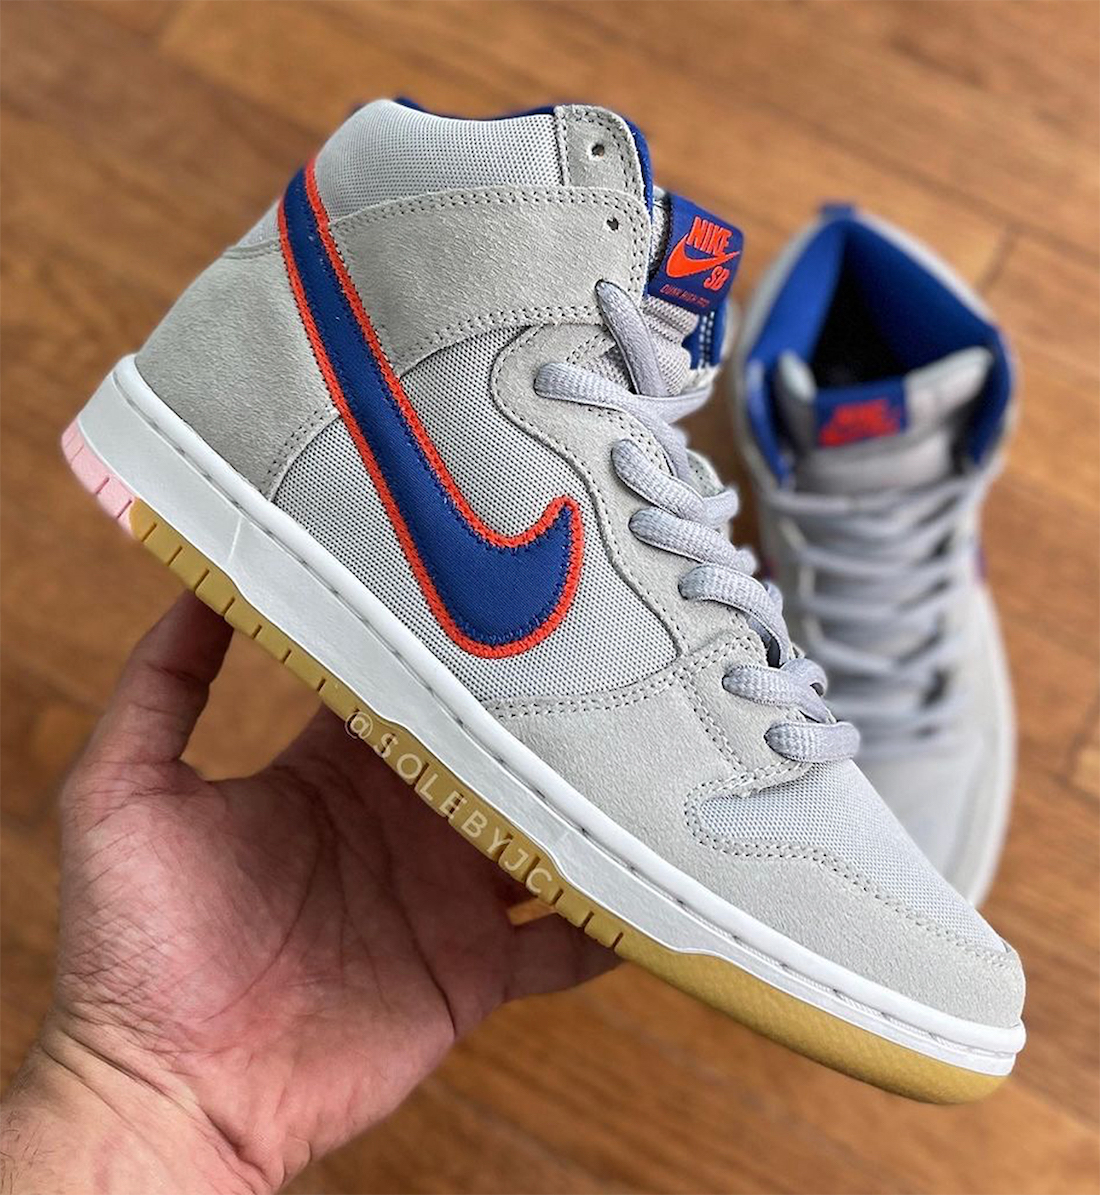 Nike SB Dunk High New York Mets DH7155 001 Release Date